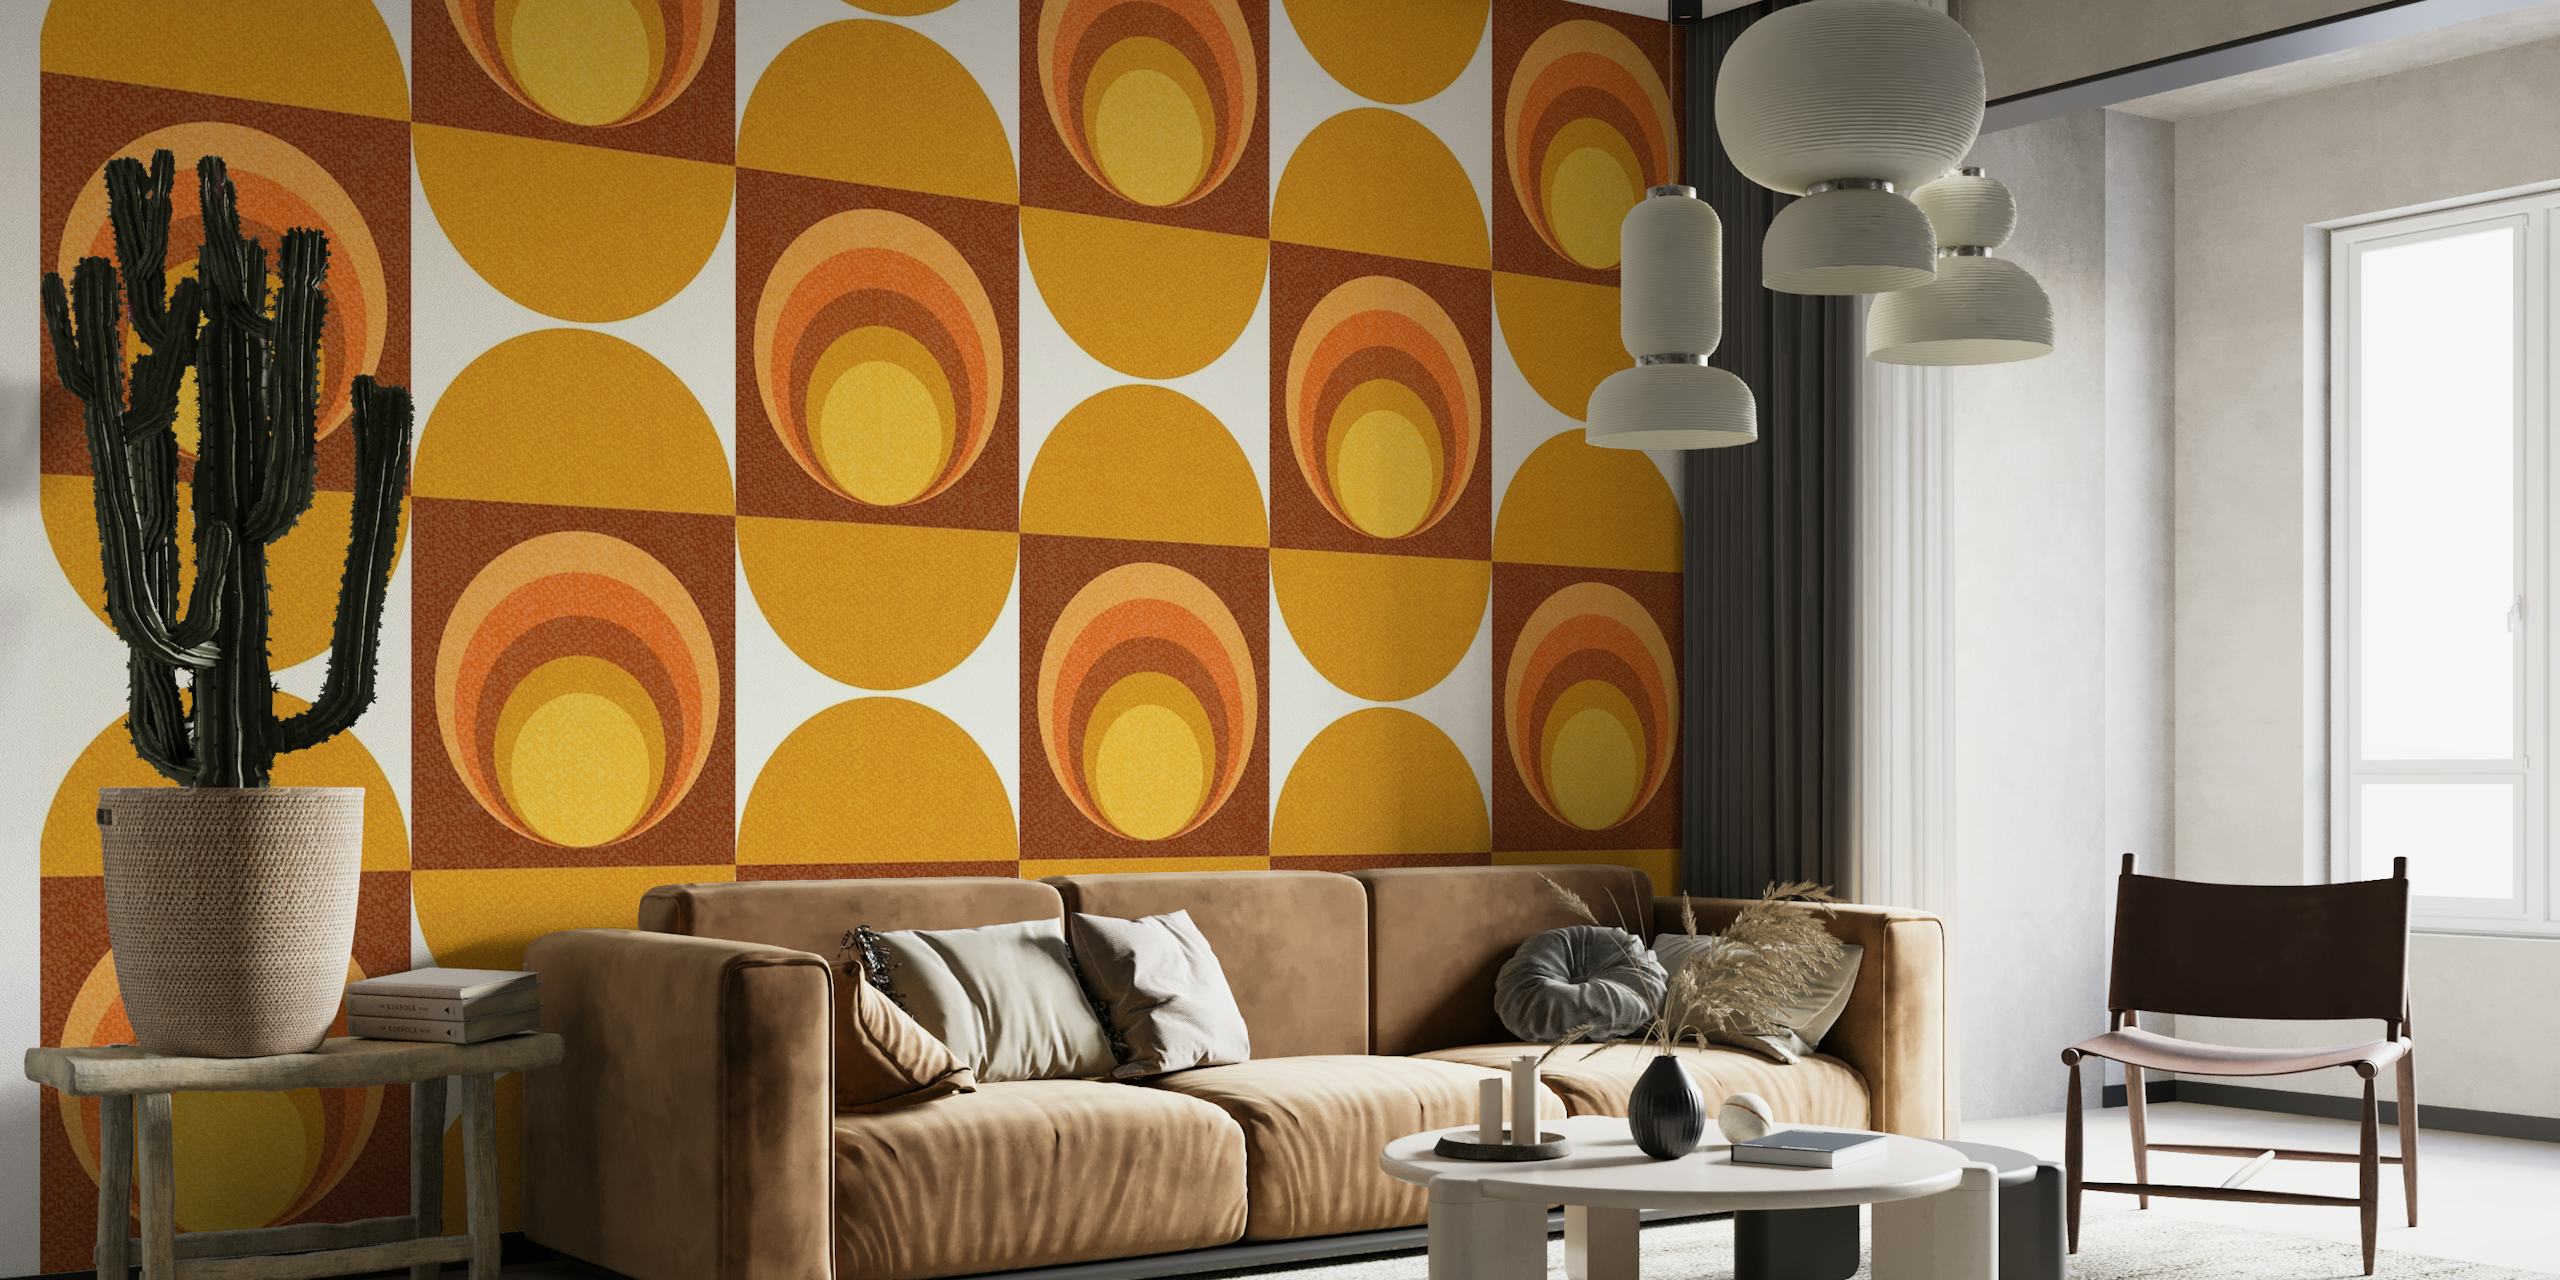 Retro-style Vintage Sun wall mural with circular sun motifs in amber and burnt sienna